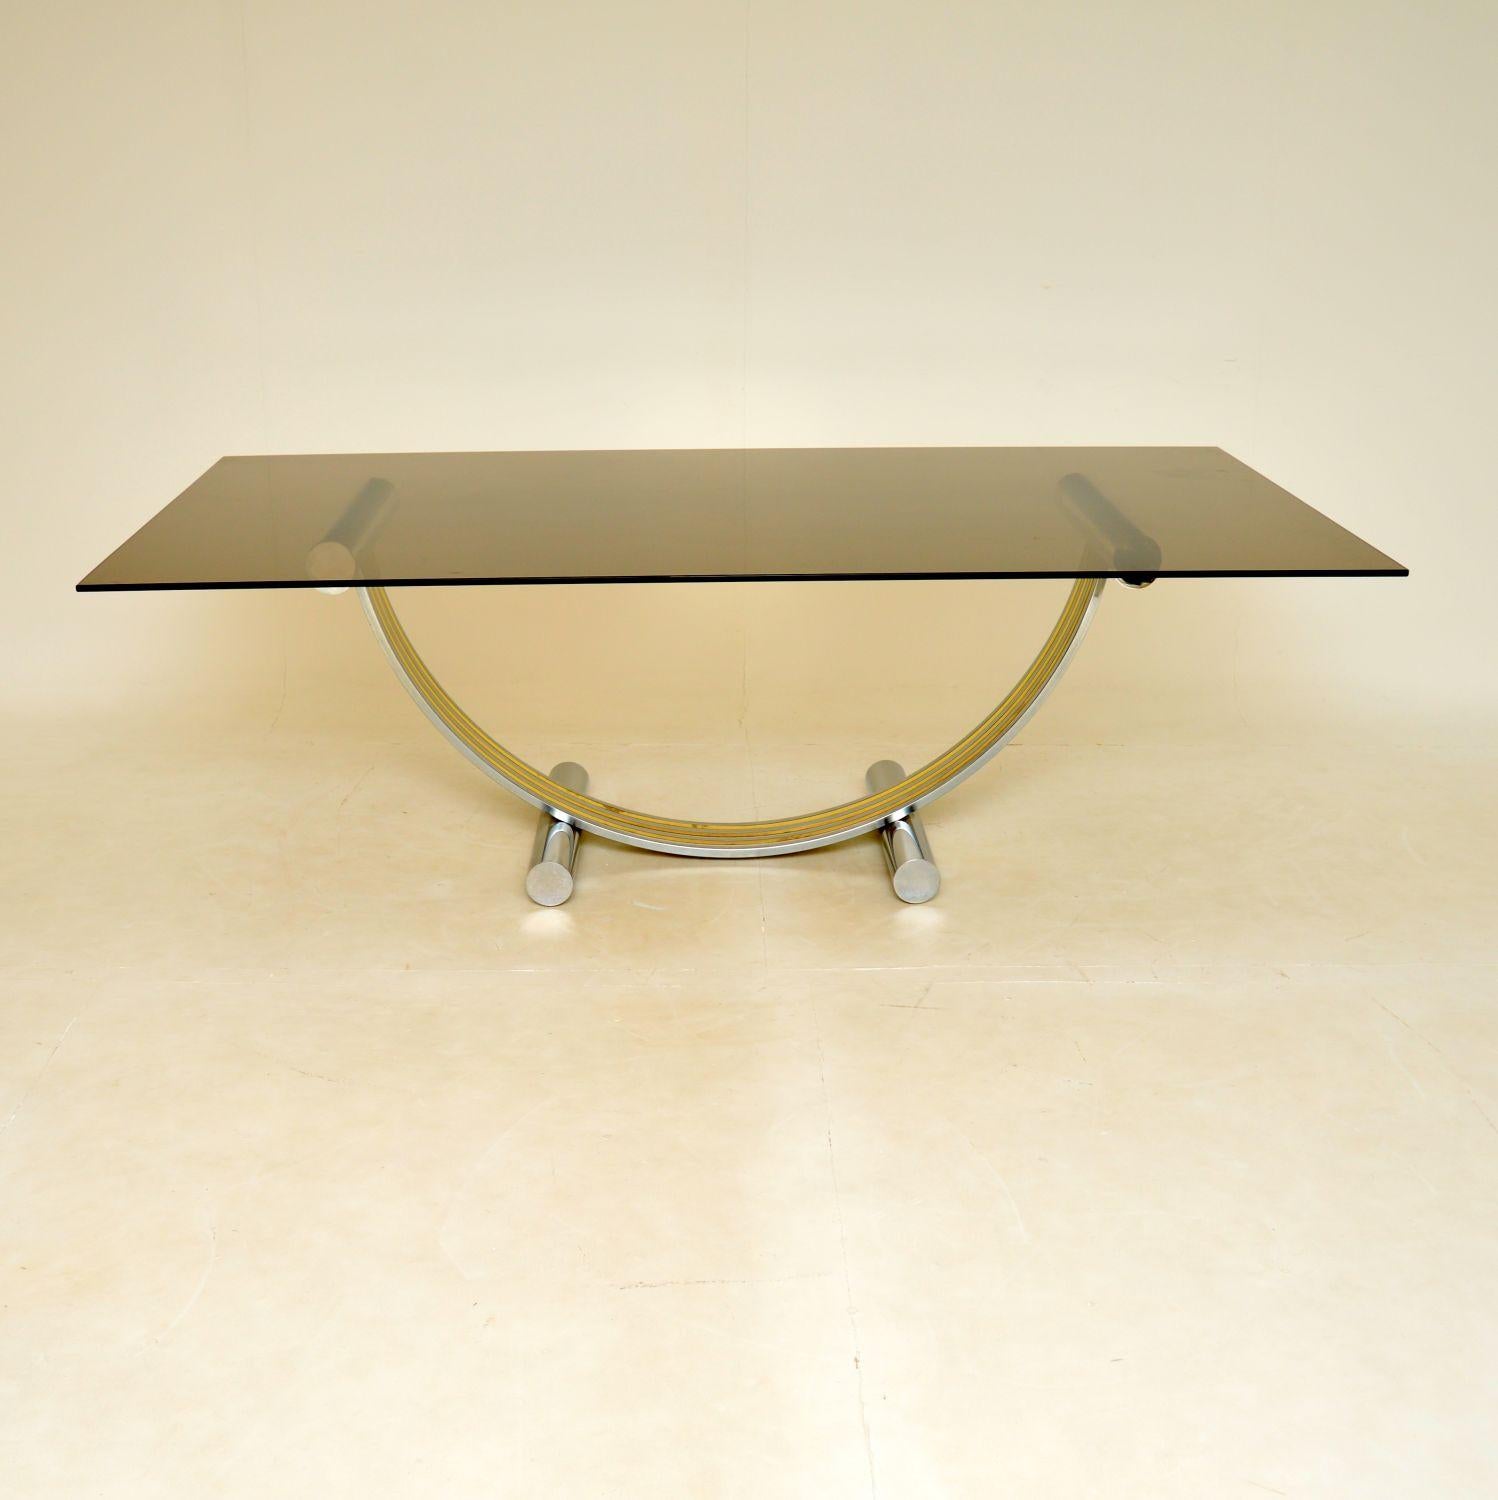 A large and absolutely stunning vintage Italian dining table by Renato Zevi. This was made in Italy, it dates from the 1970’s.

The quality is exceptional, the U shaped base is beautifully made from chrome and brass, and it supports a very thick